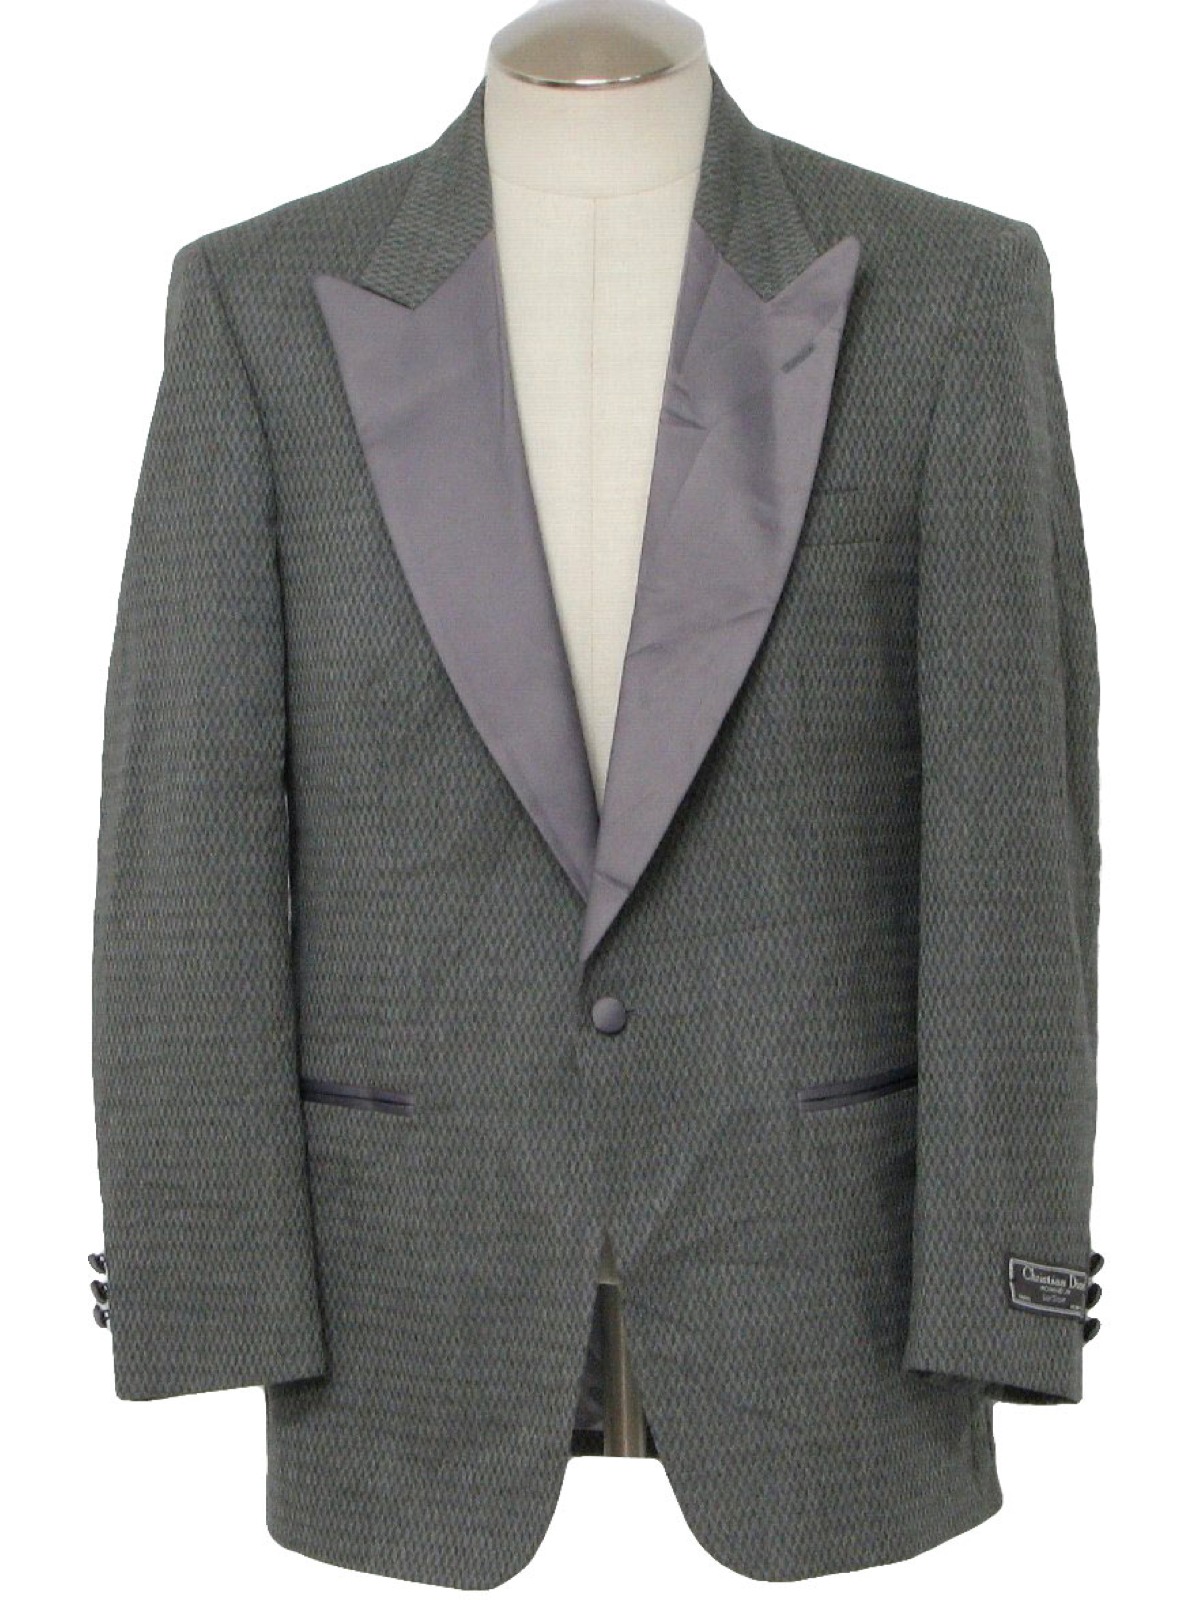 Eighties Christian Dior Jacket: 80s -Christian Dior- Mens grey and ...